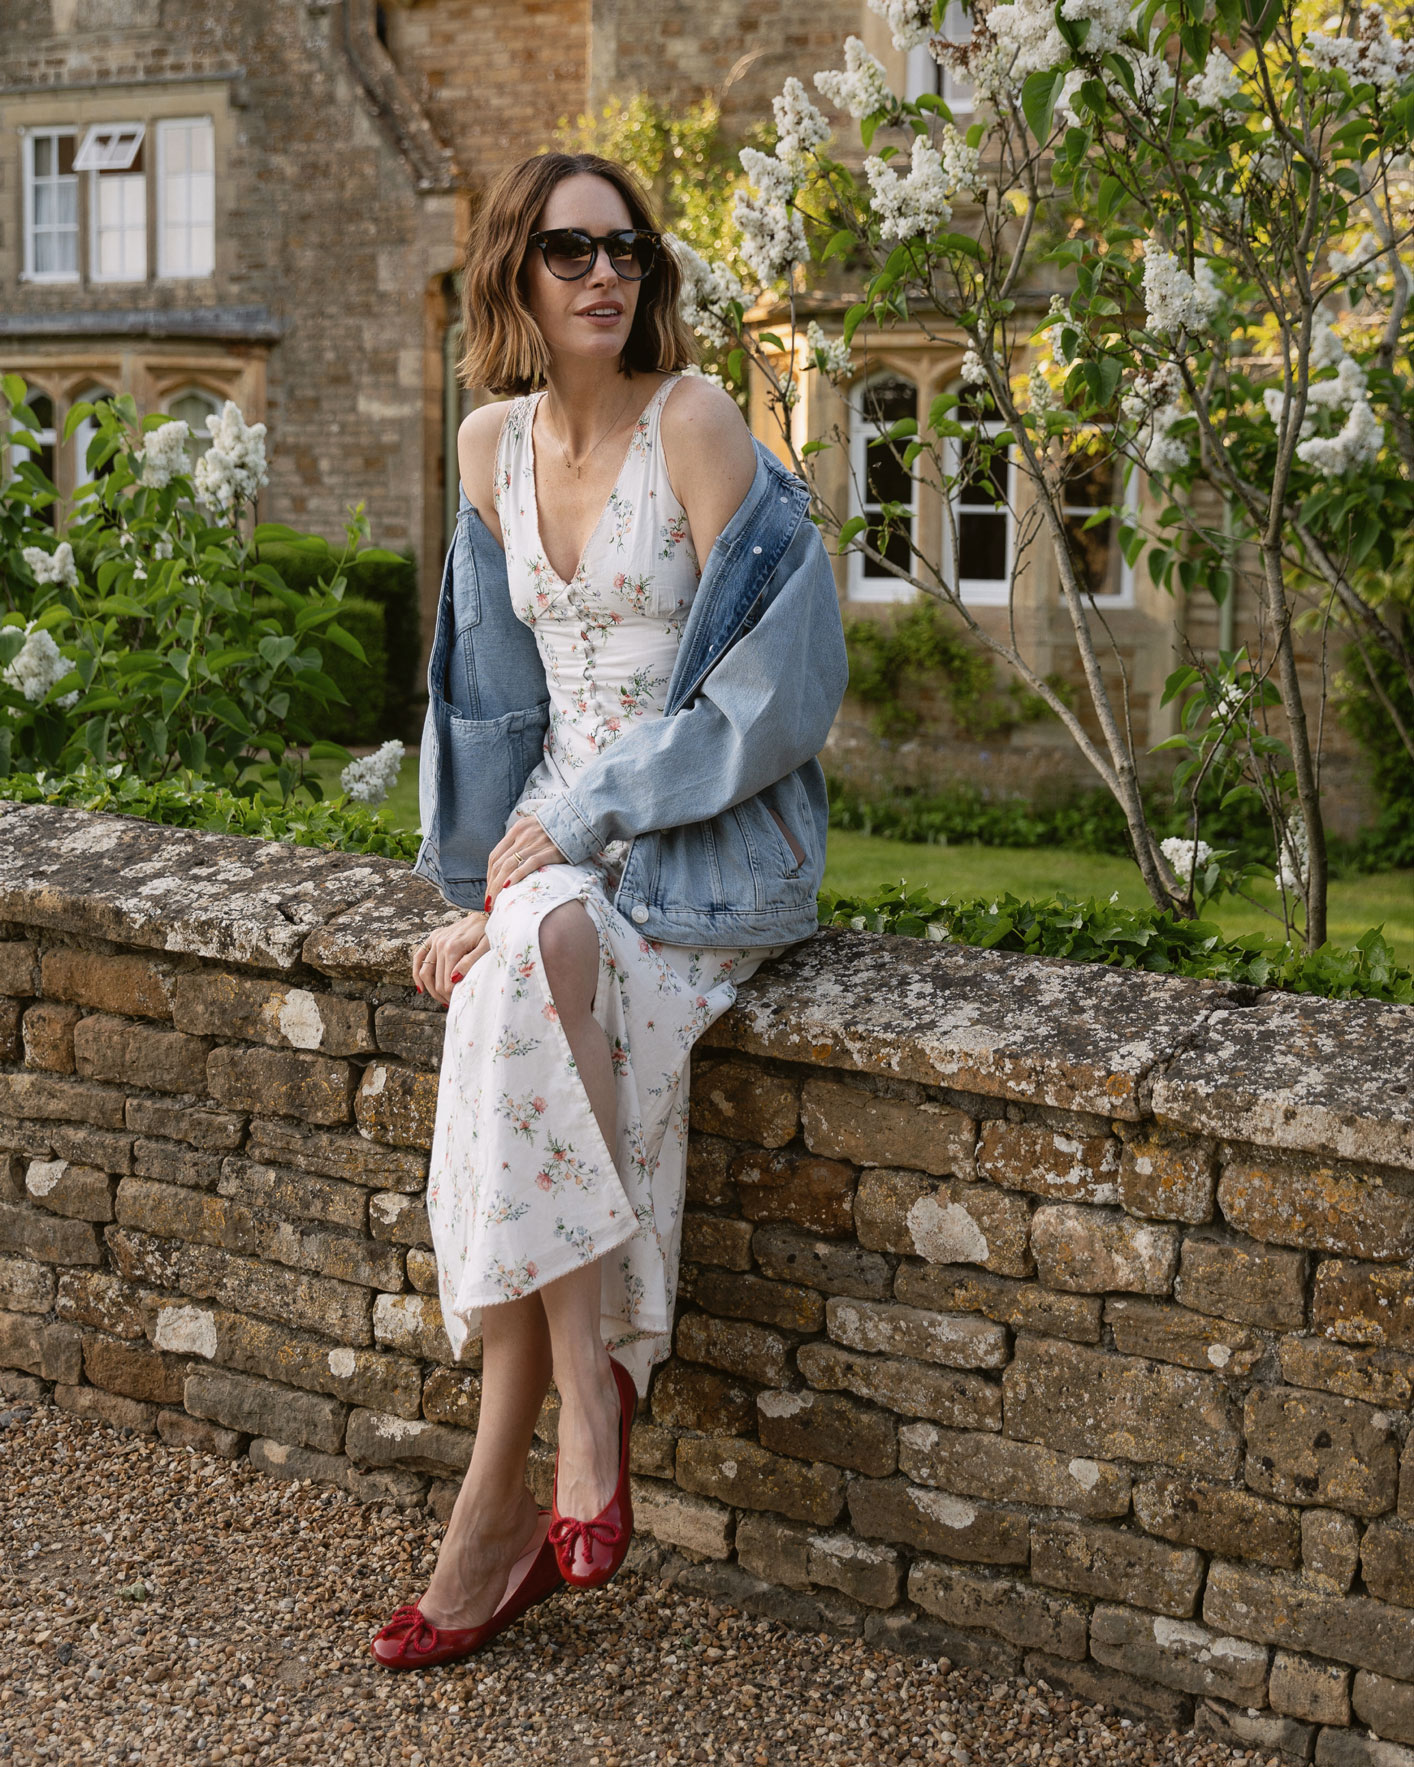 Louise in the Cotswolds